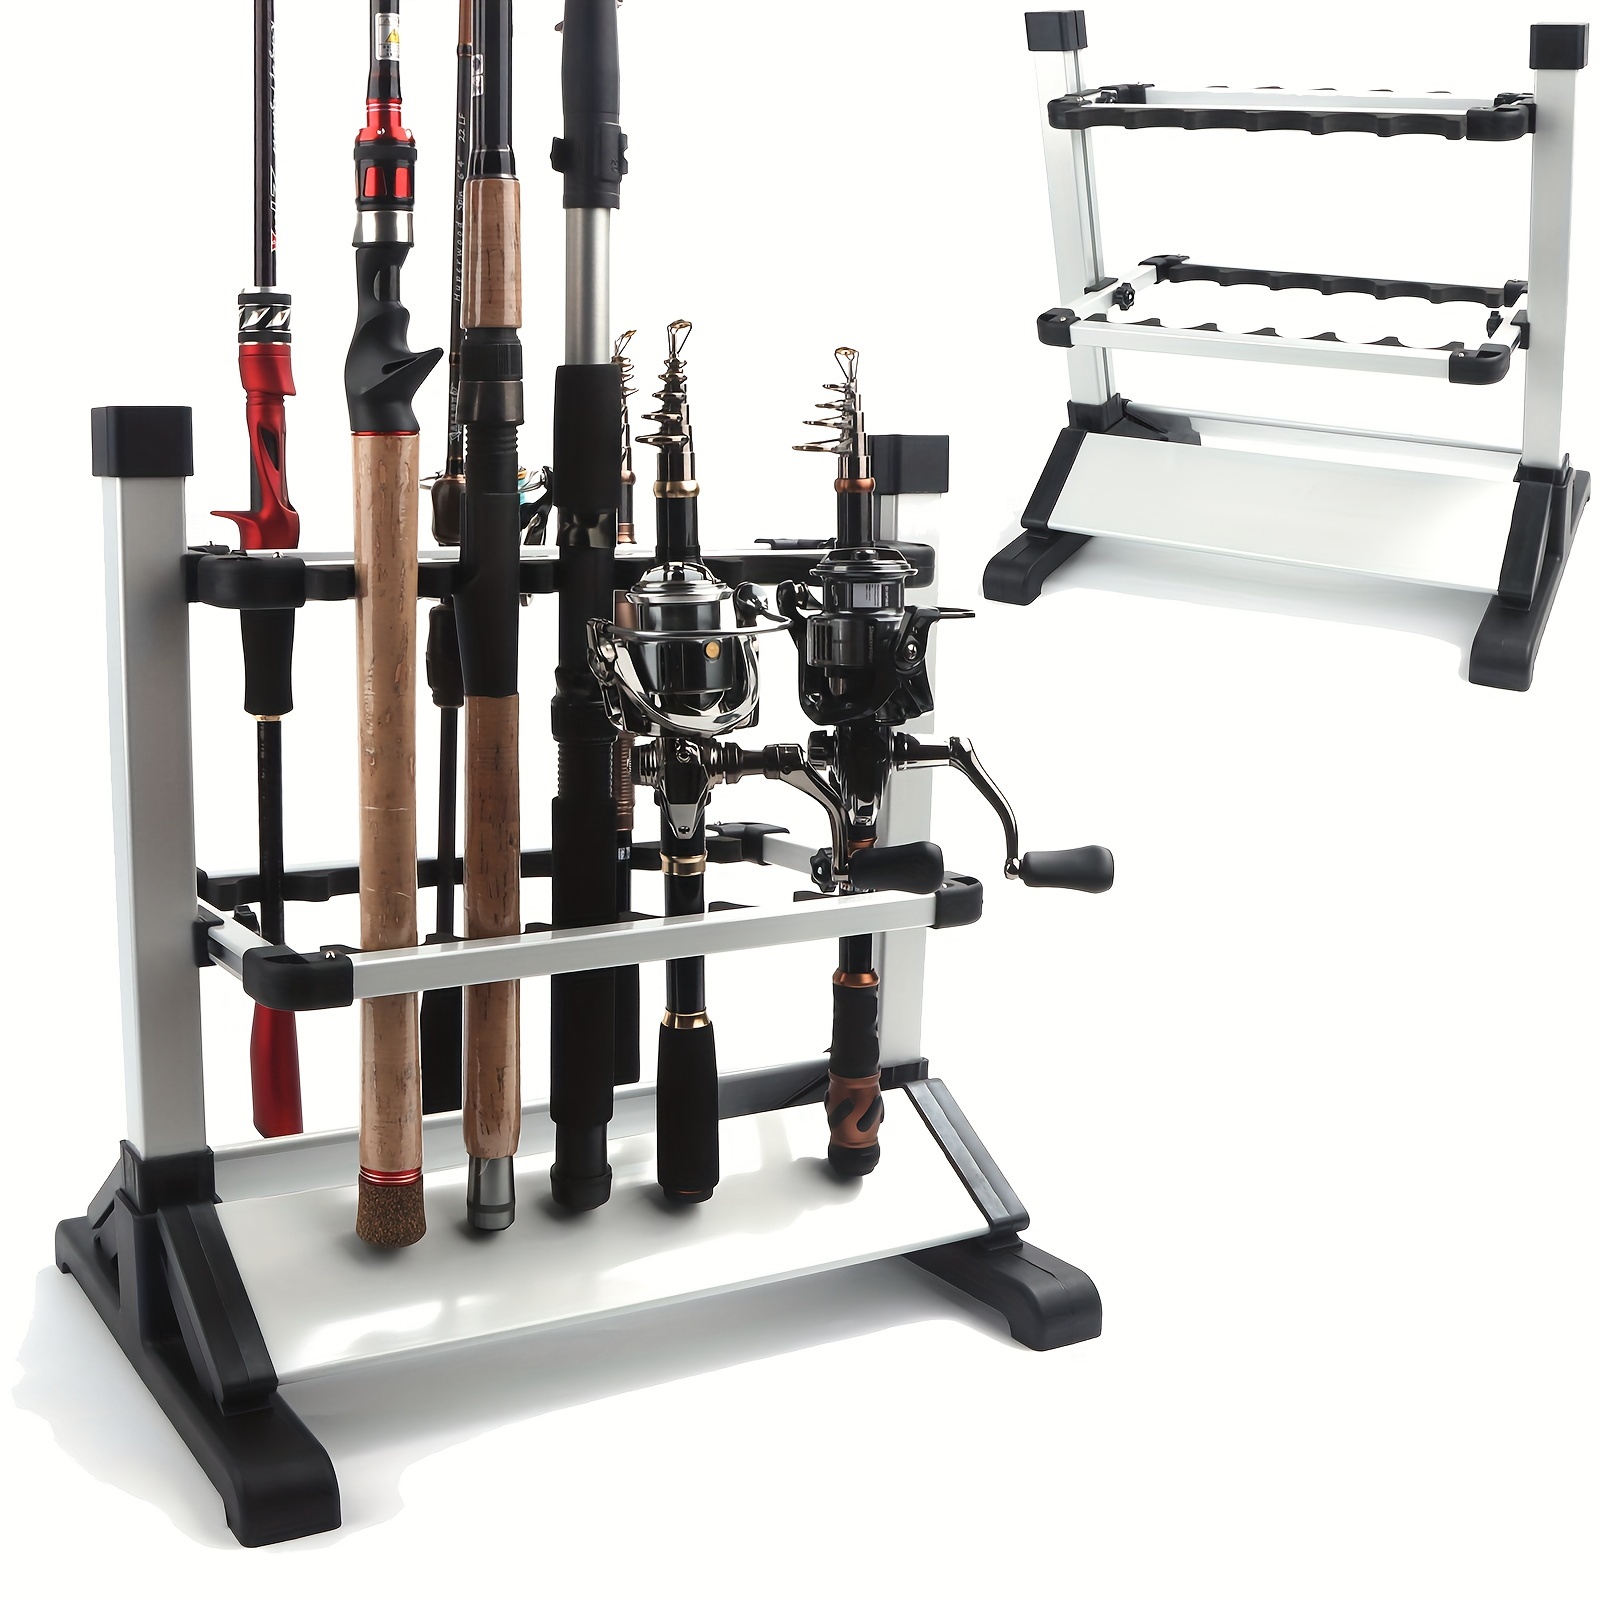 

Yvleen Fishing Rod Rack - Portable Aluminum Rod Holder, Holds Up To 12 Or 24 Rods, Fishing Pole Storage Organizer For Garage Or Home